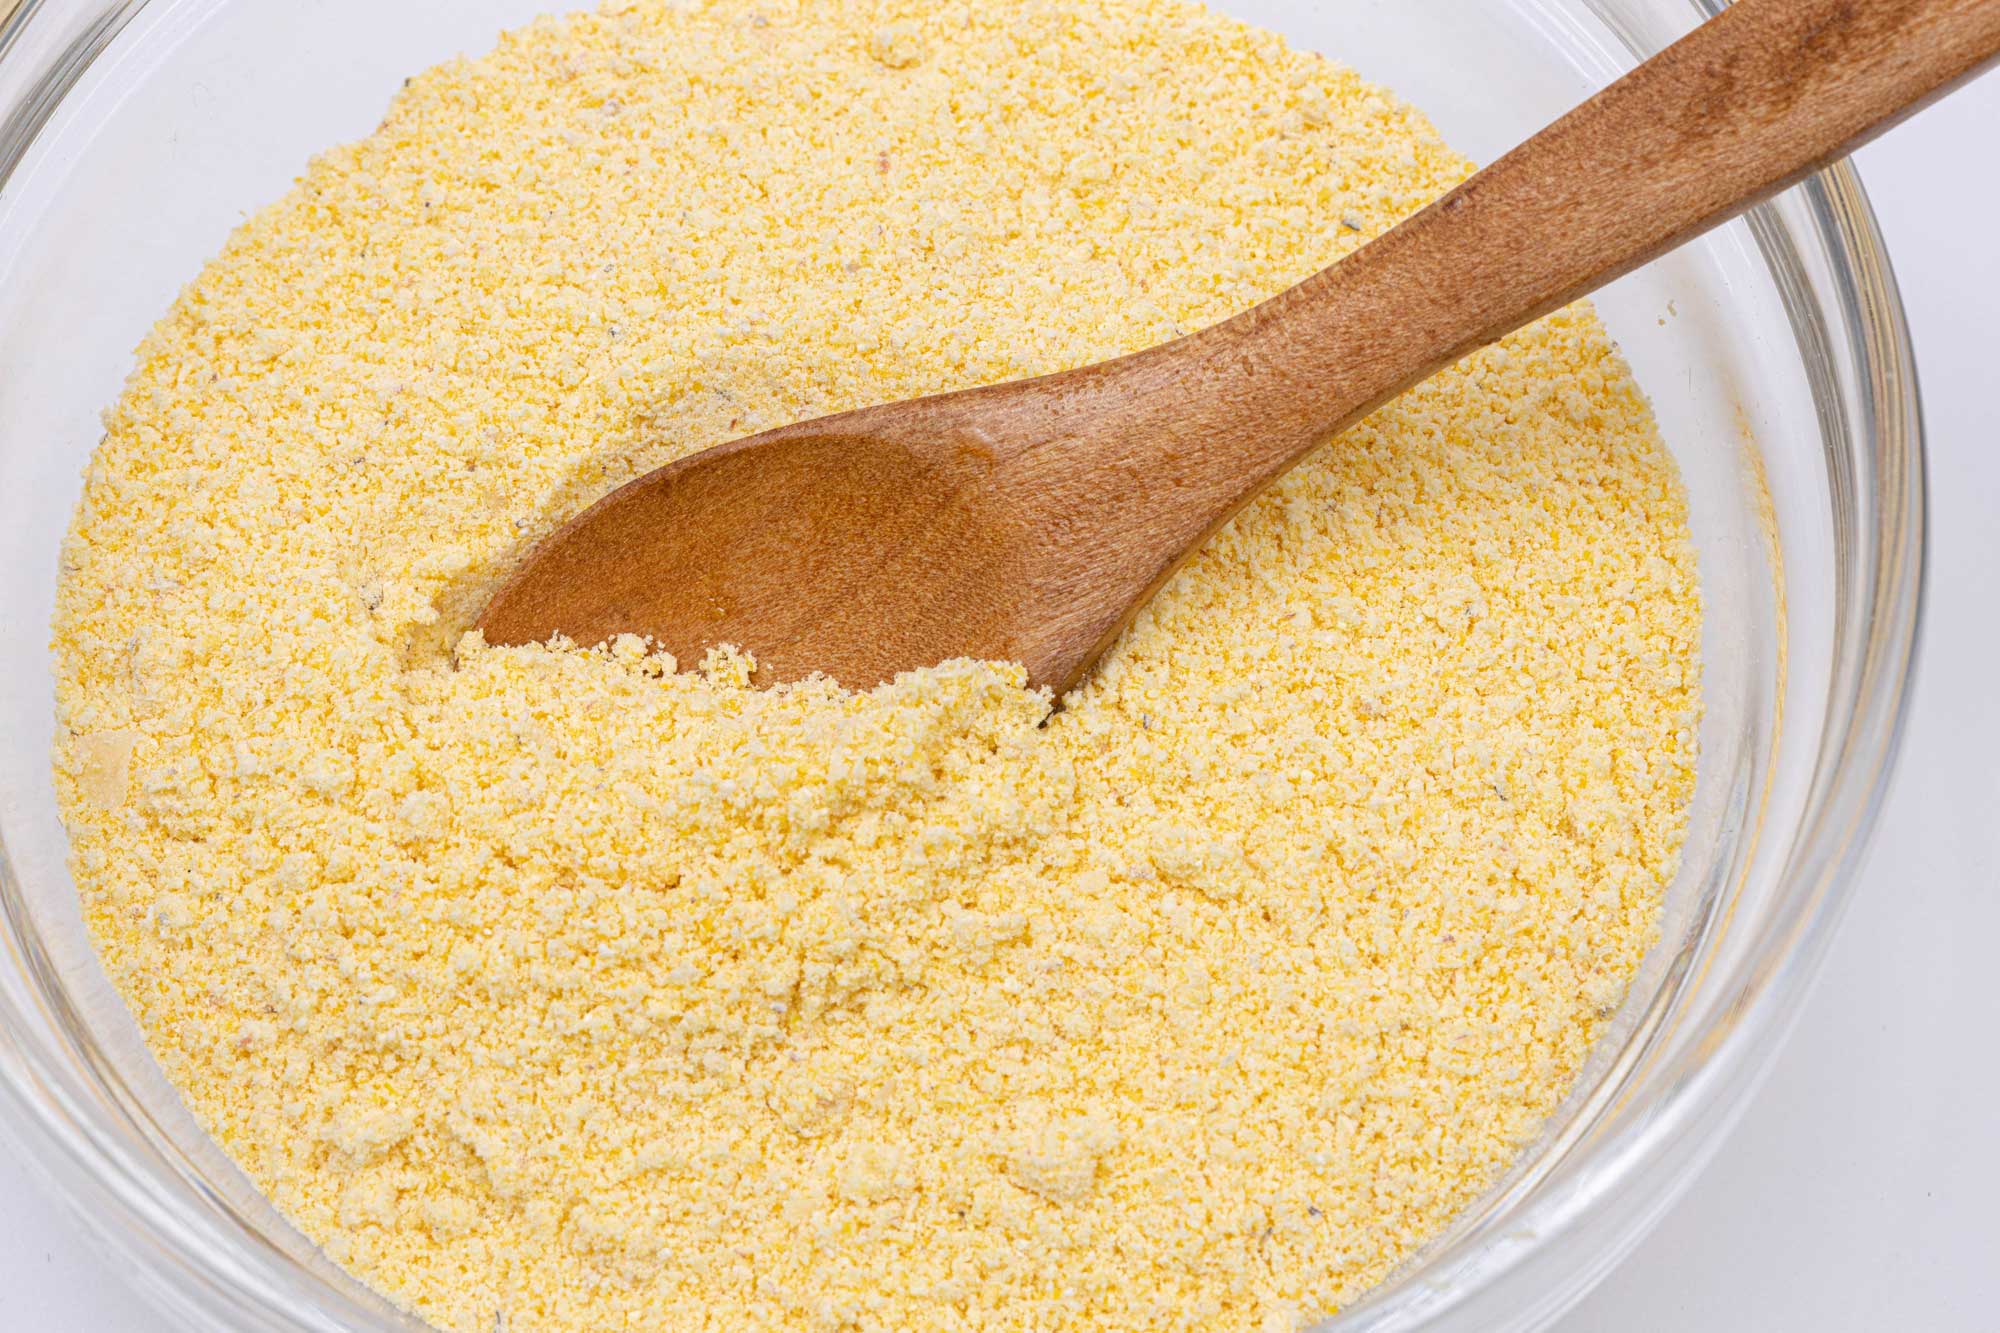 Photograph of corn flour. The photo shows a clear glass bowl full of corn flour. The flour is light yellow in color and looks granular. A wooden spoon is resting in the flour.